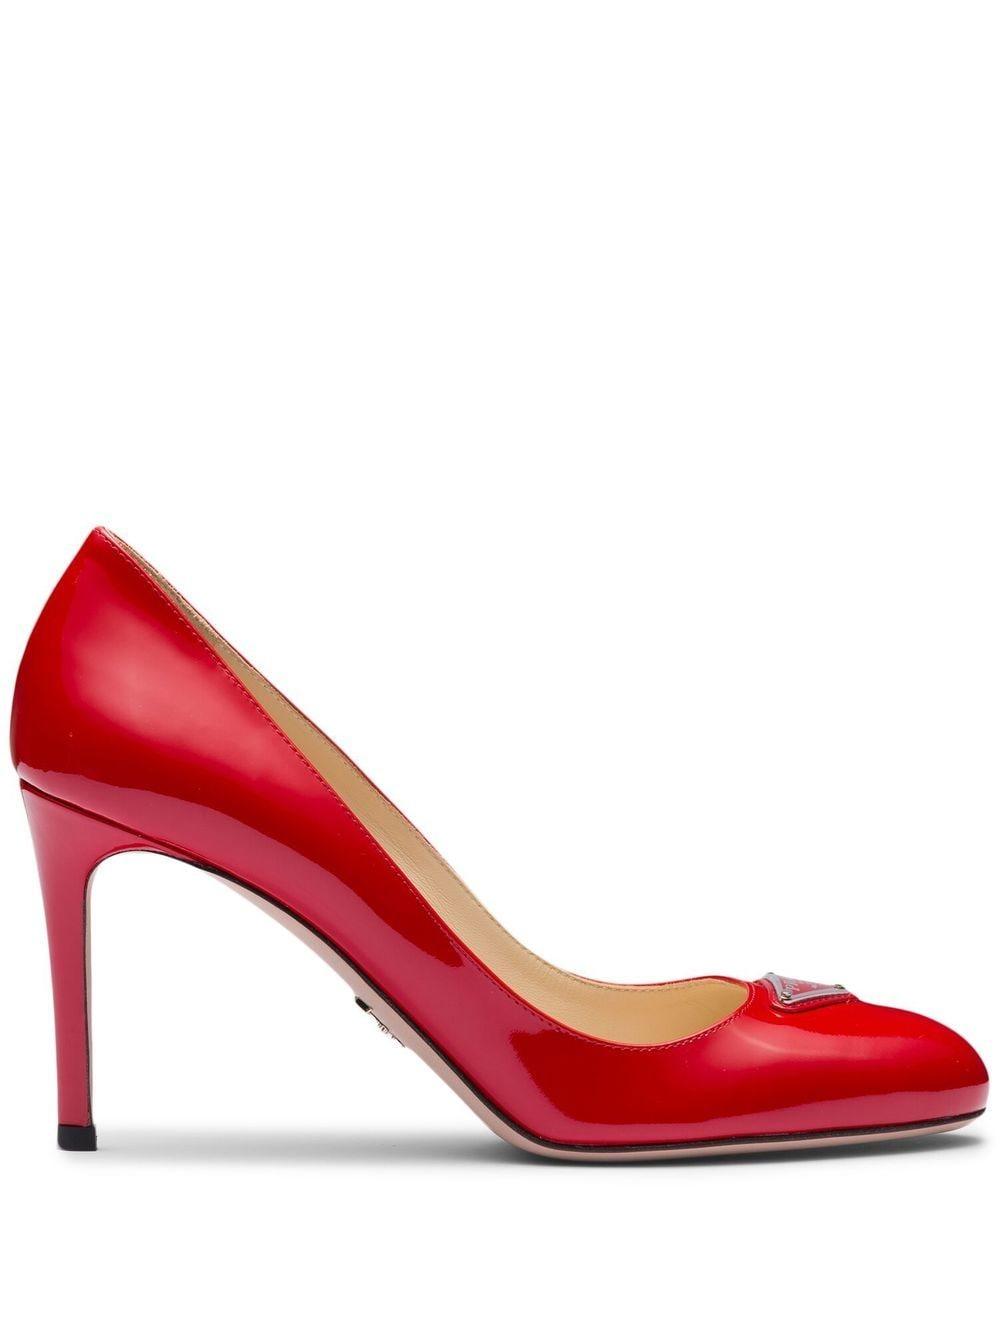 Prada Patent Leather Pumps in Red | Lyst